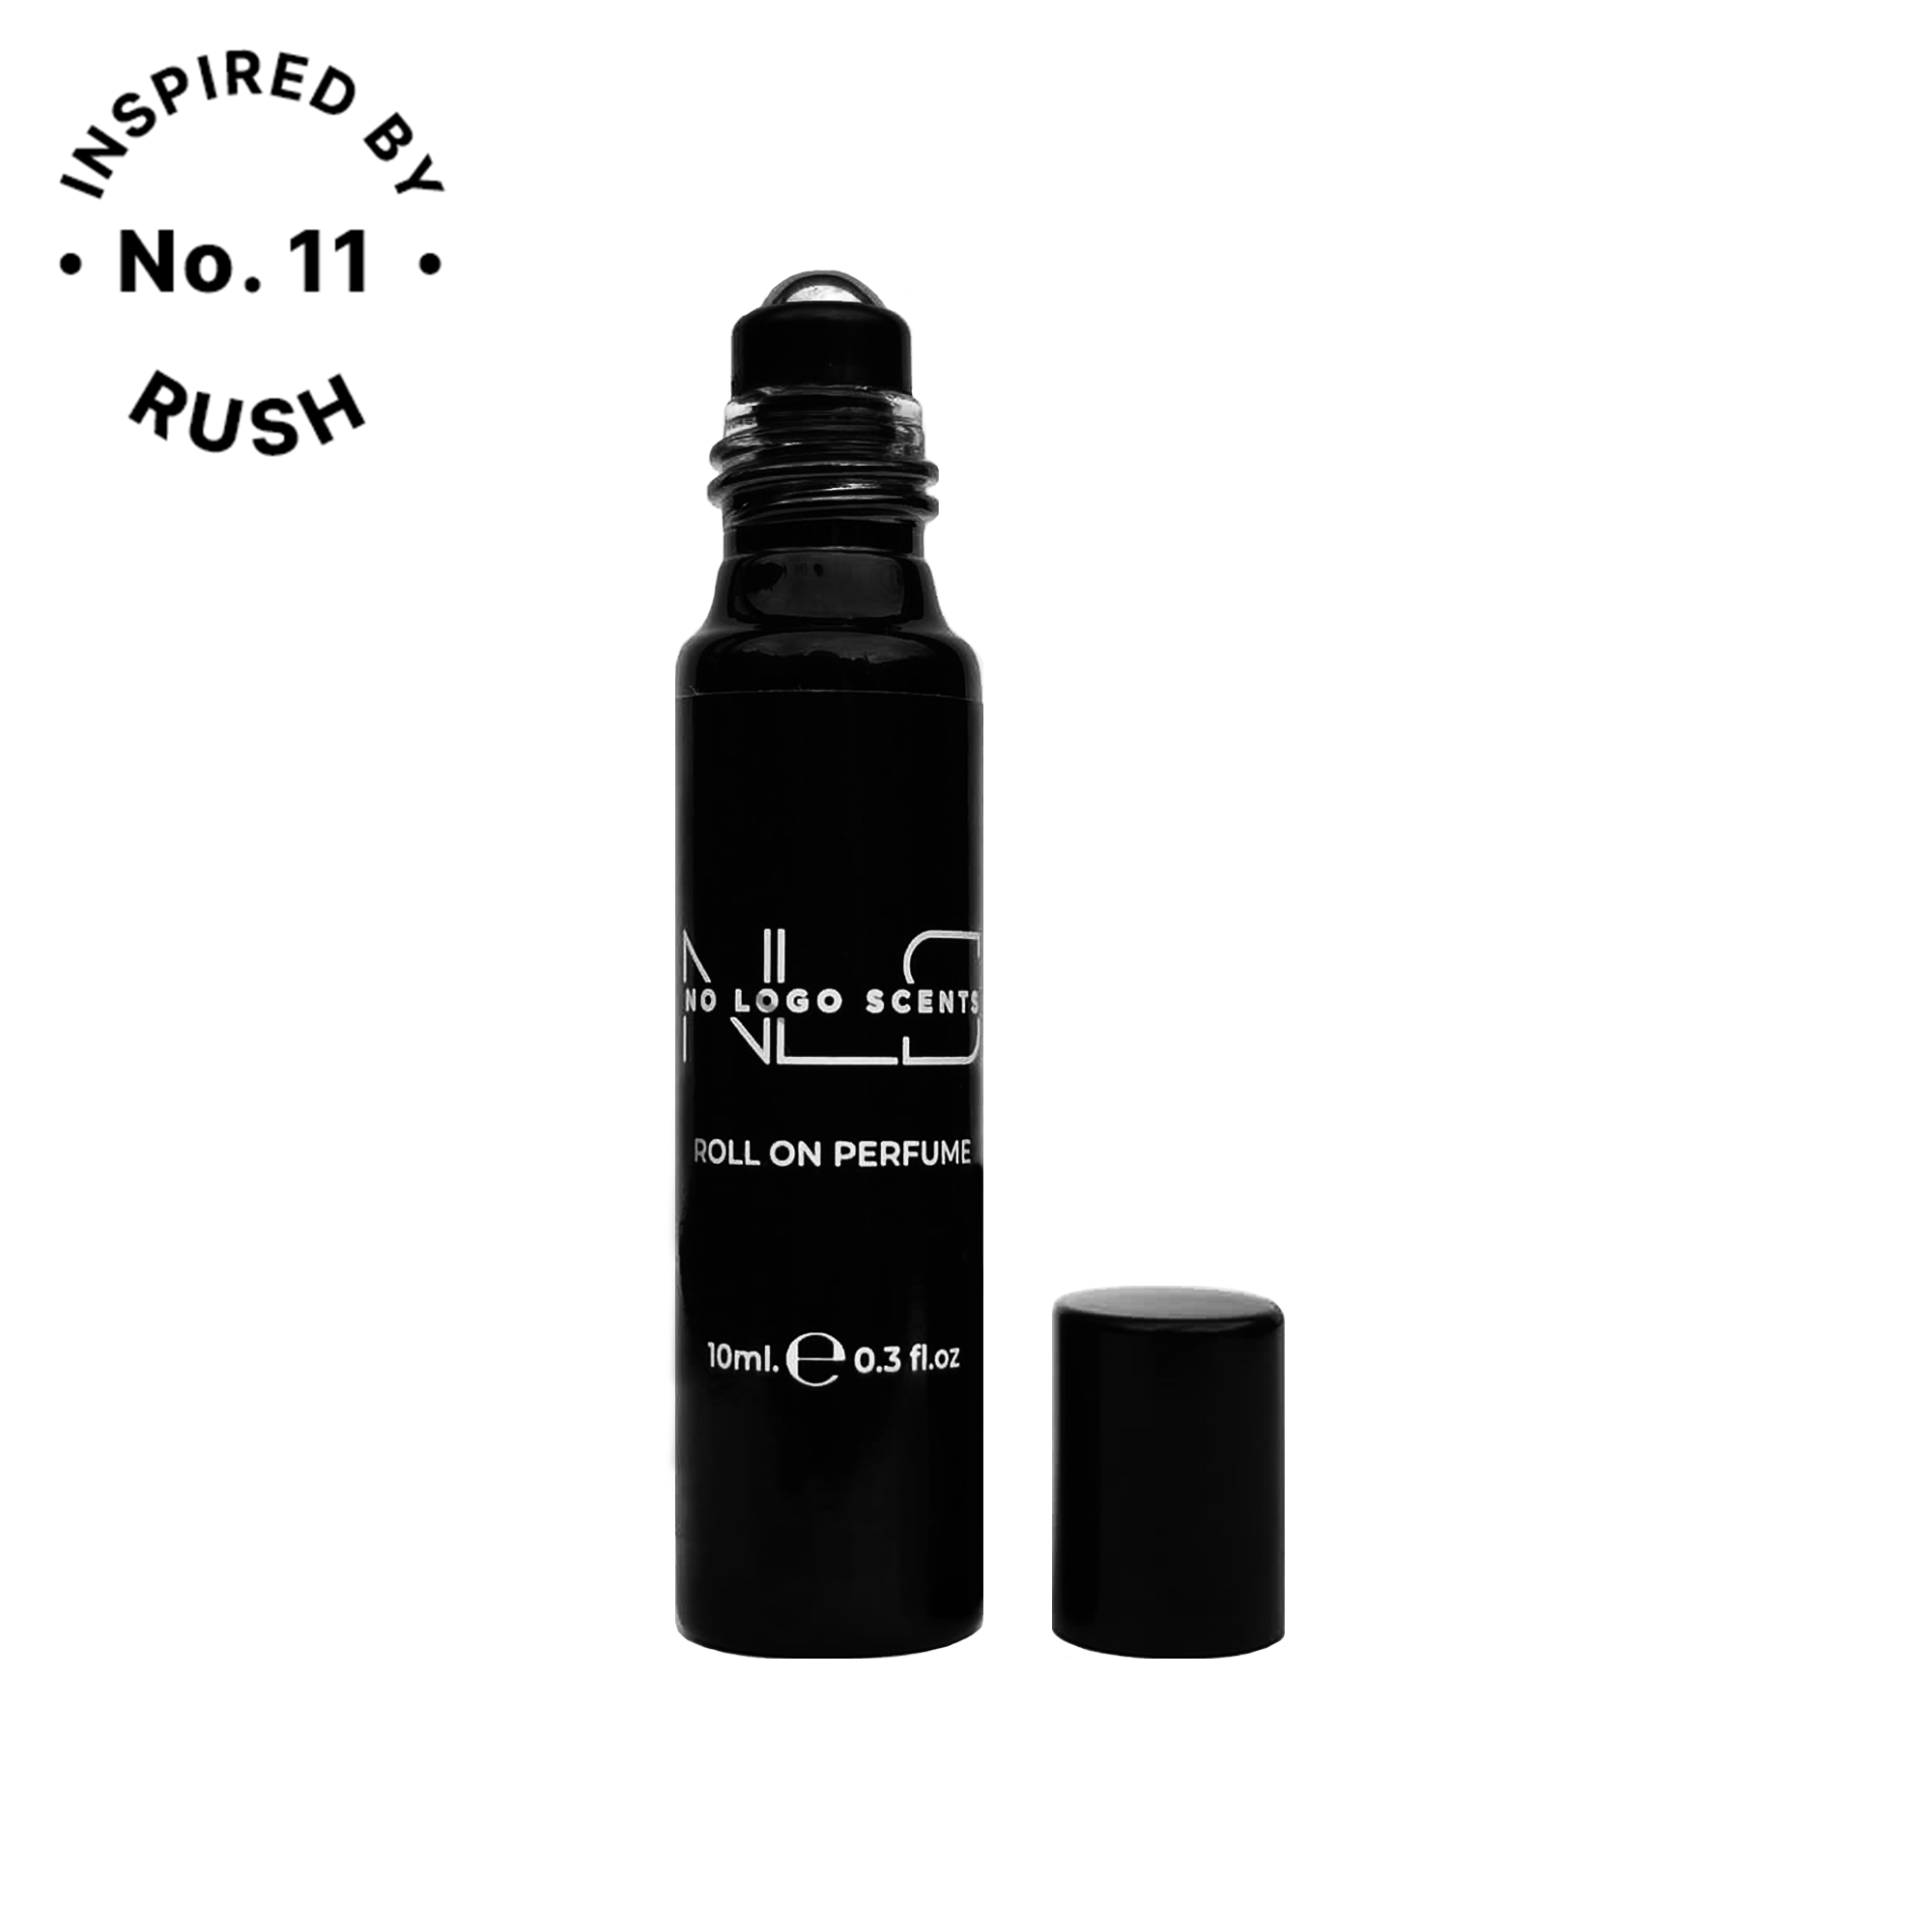 No.11 INSPIRED BY RUSH from category WOMEN’S ROLL ON PERFUMES - 1